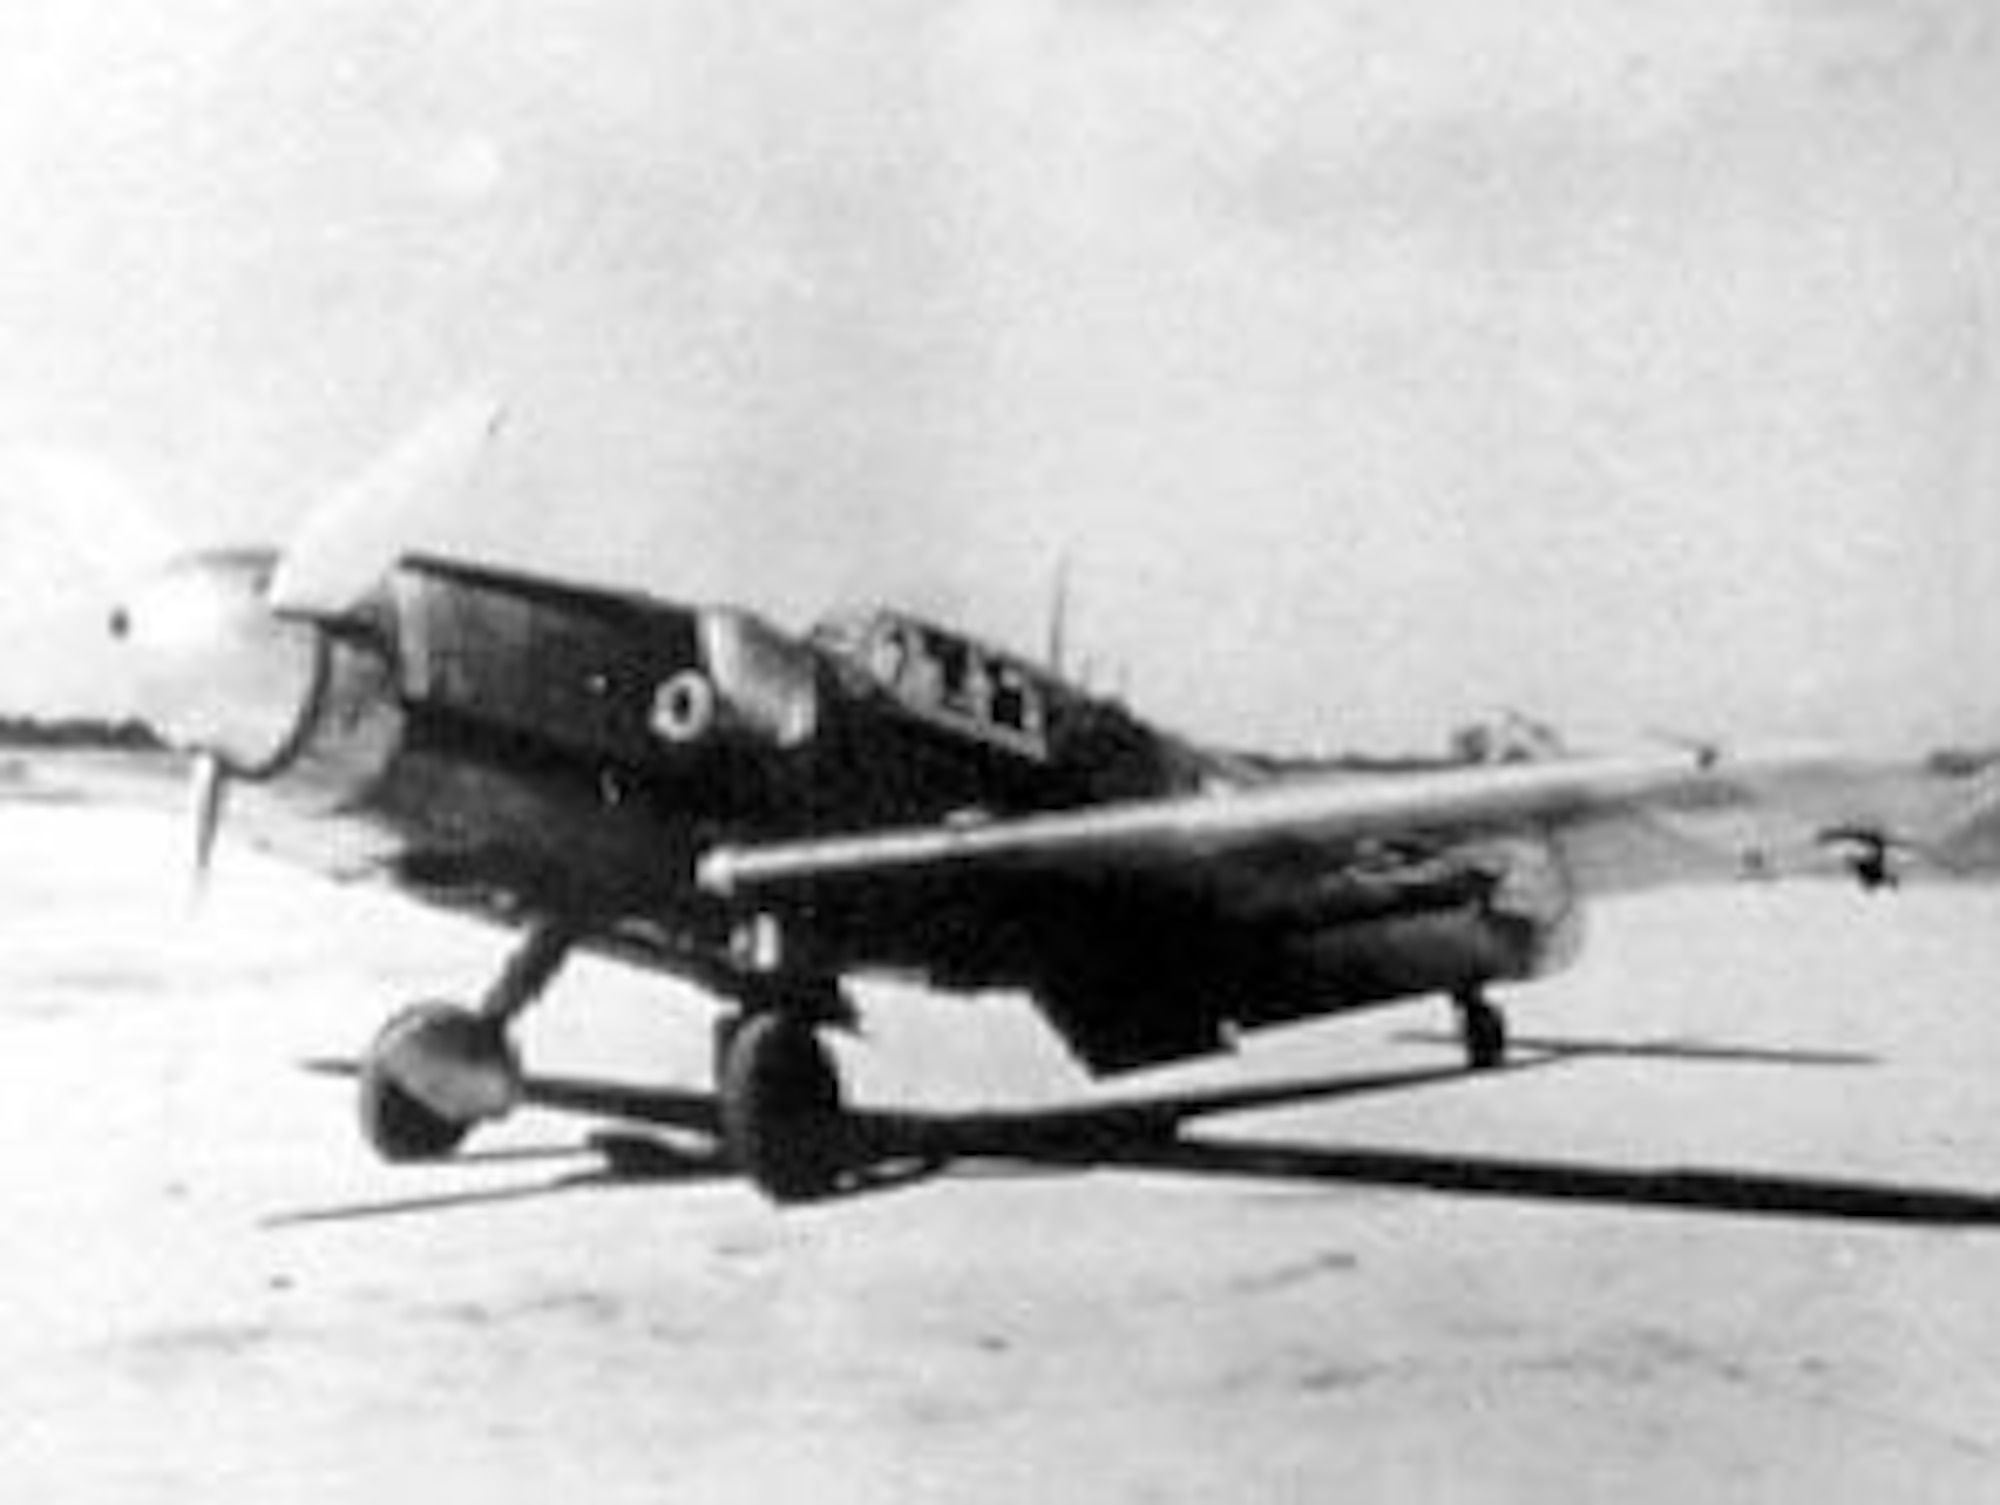 The two Luftwaffe single-engine fighters used primarily for intercepting B-17s and B-24s were the Messerschmitt Me 109 (shown here) and the Focke-Wulf Fw 190. (U.S. Air Force photo)